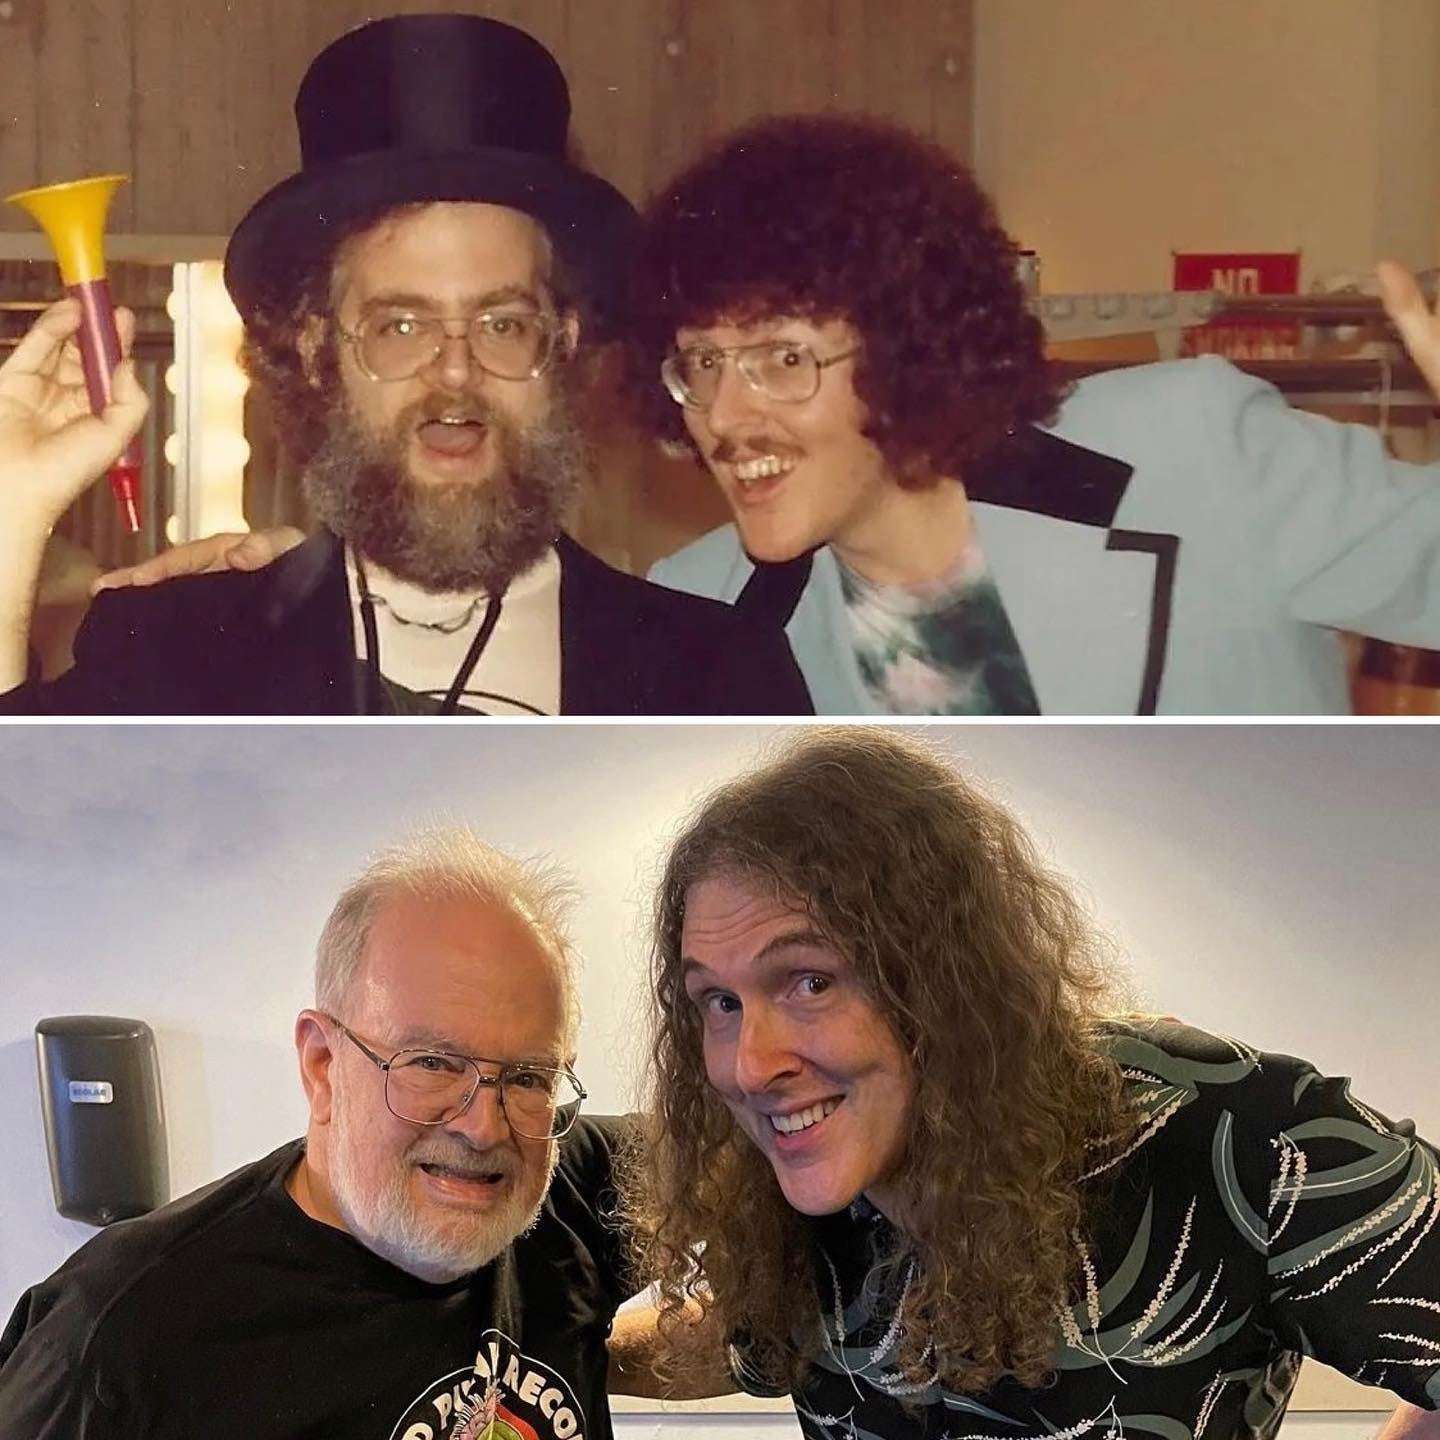 image showing Weird Al and his mentor, Dr. Demento - 1976 and this year.